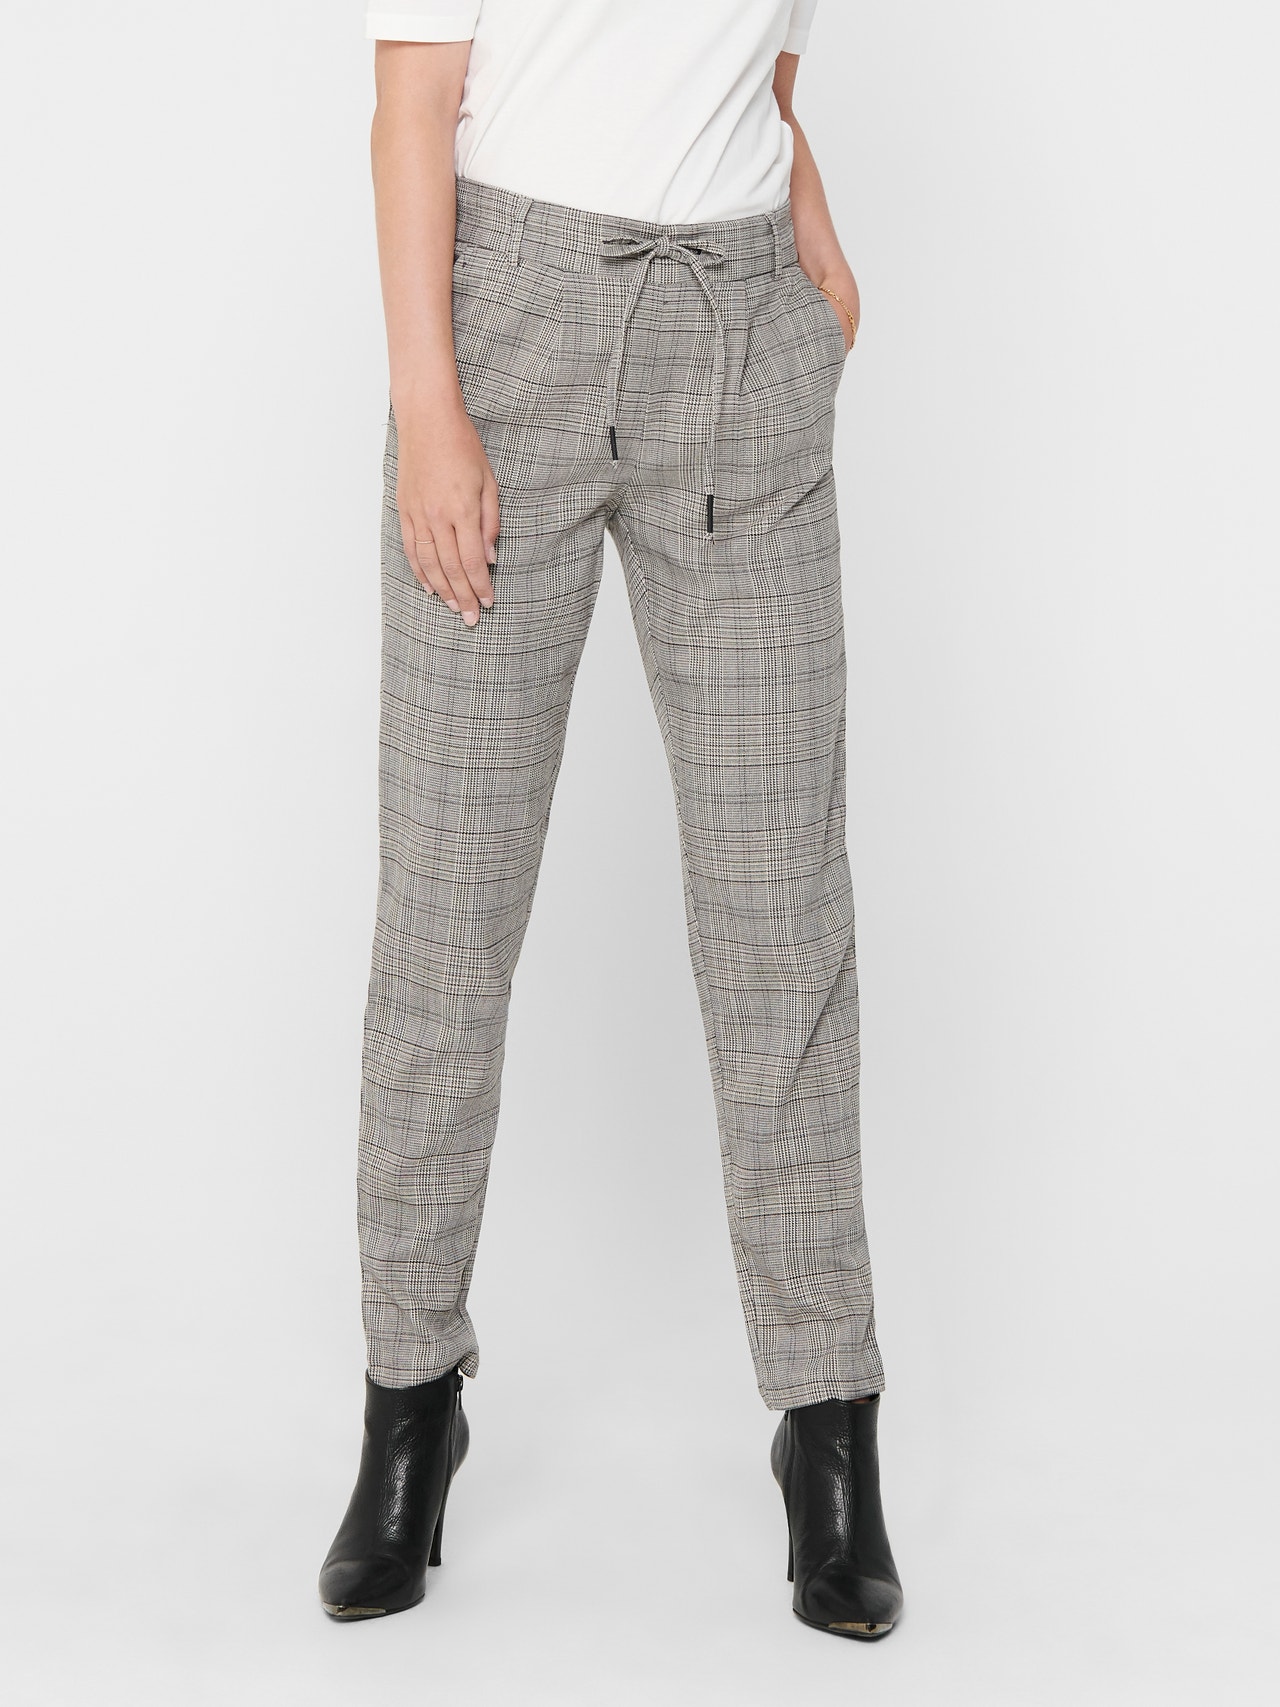 ONLY Poptrash checked Trousers -Black - 15182364